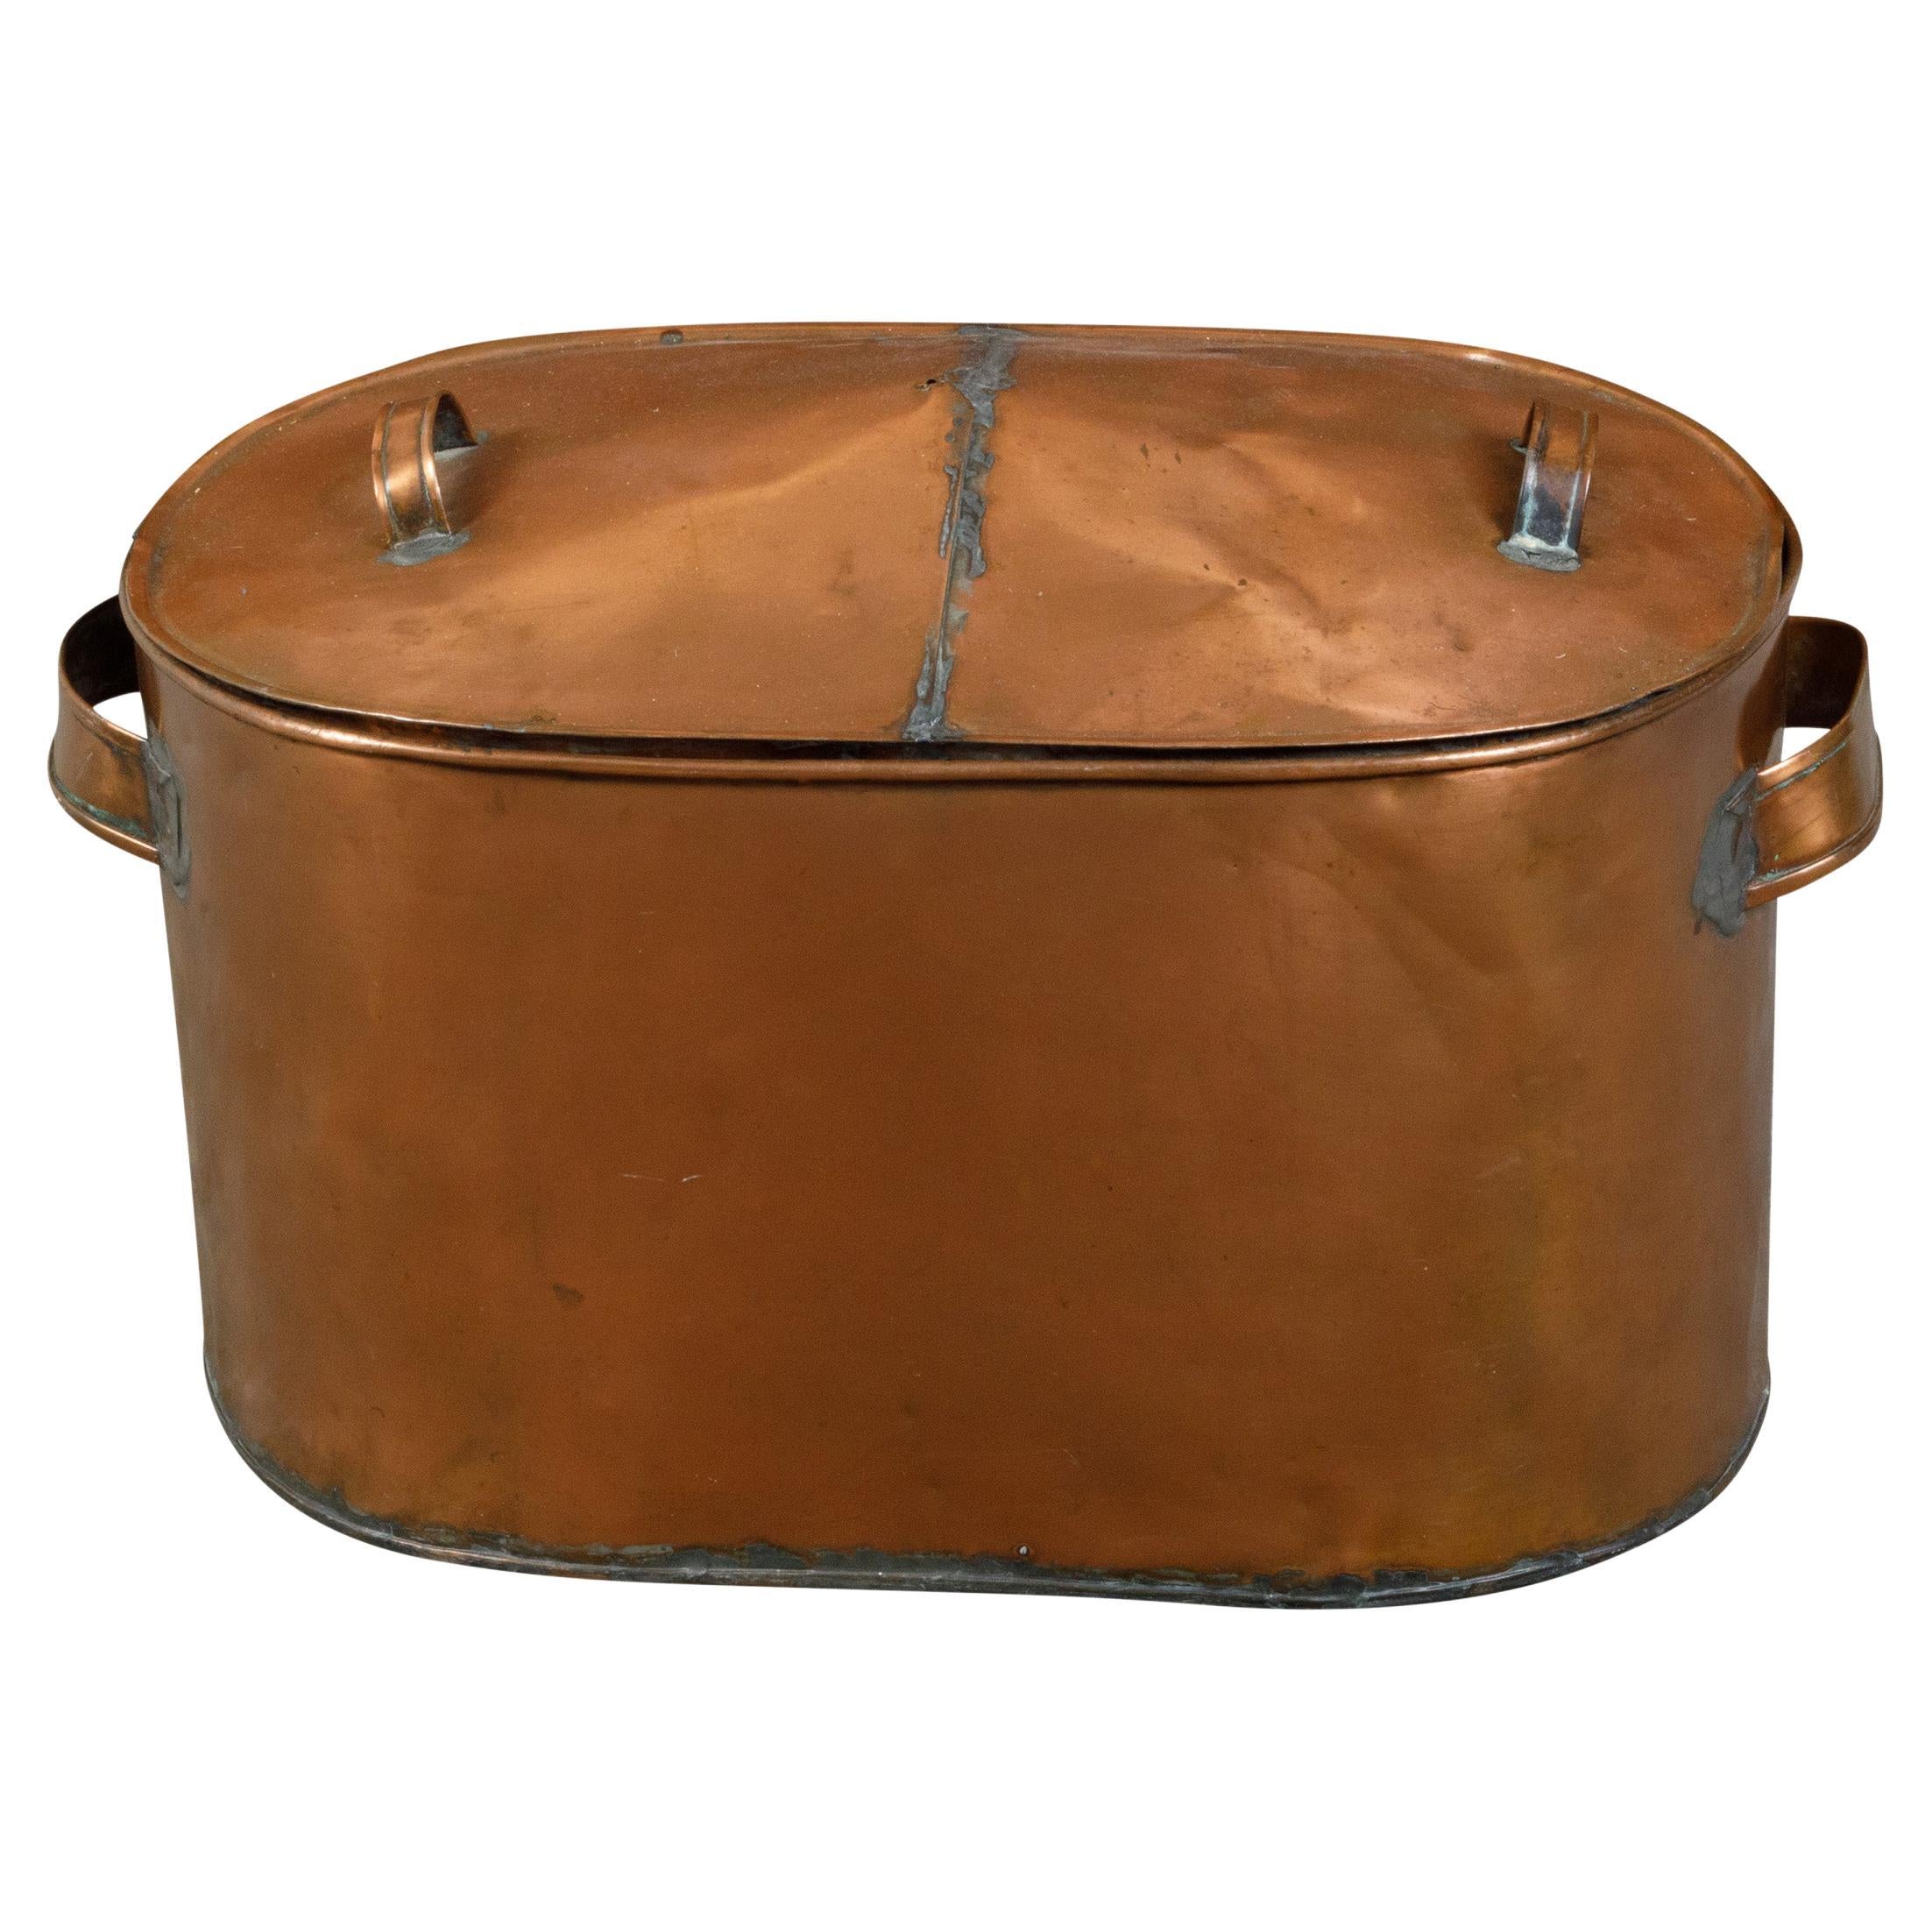 Large English 1930s Copper Braising Pan with Handles and Weathered Patina